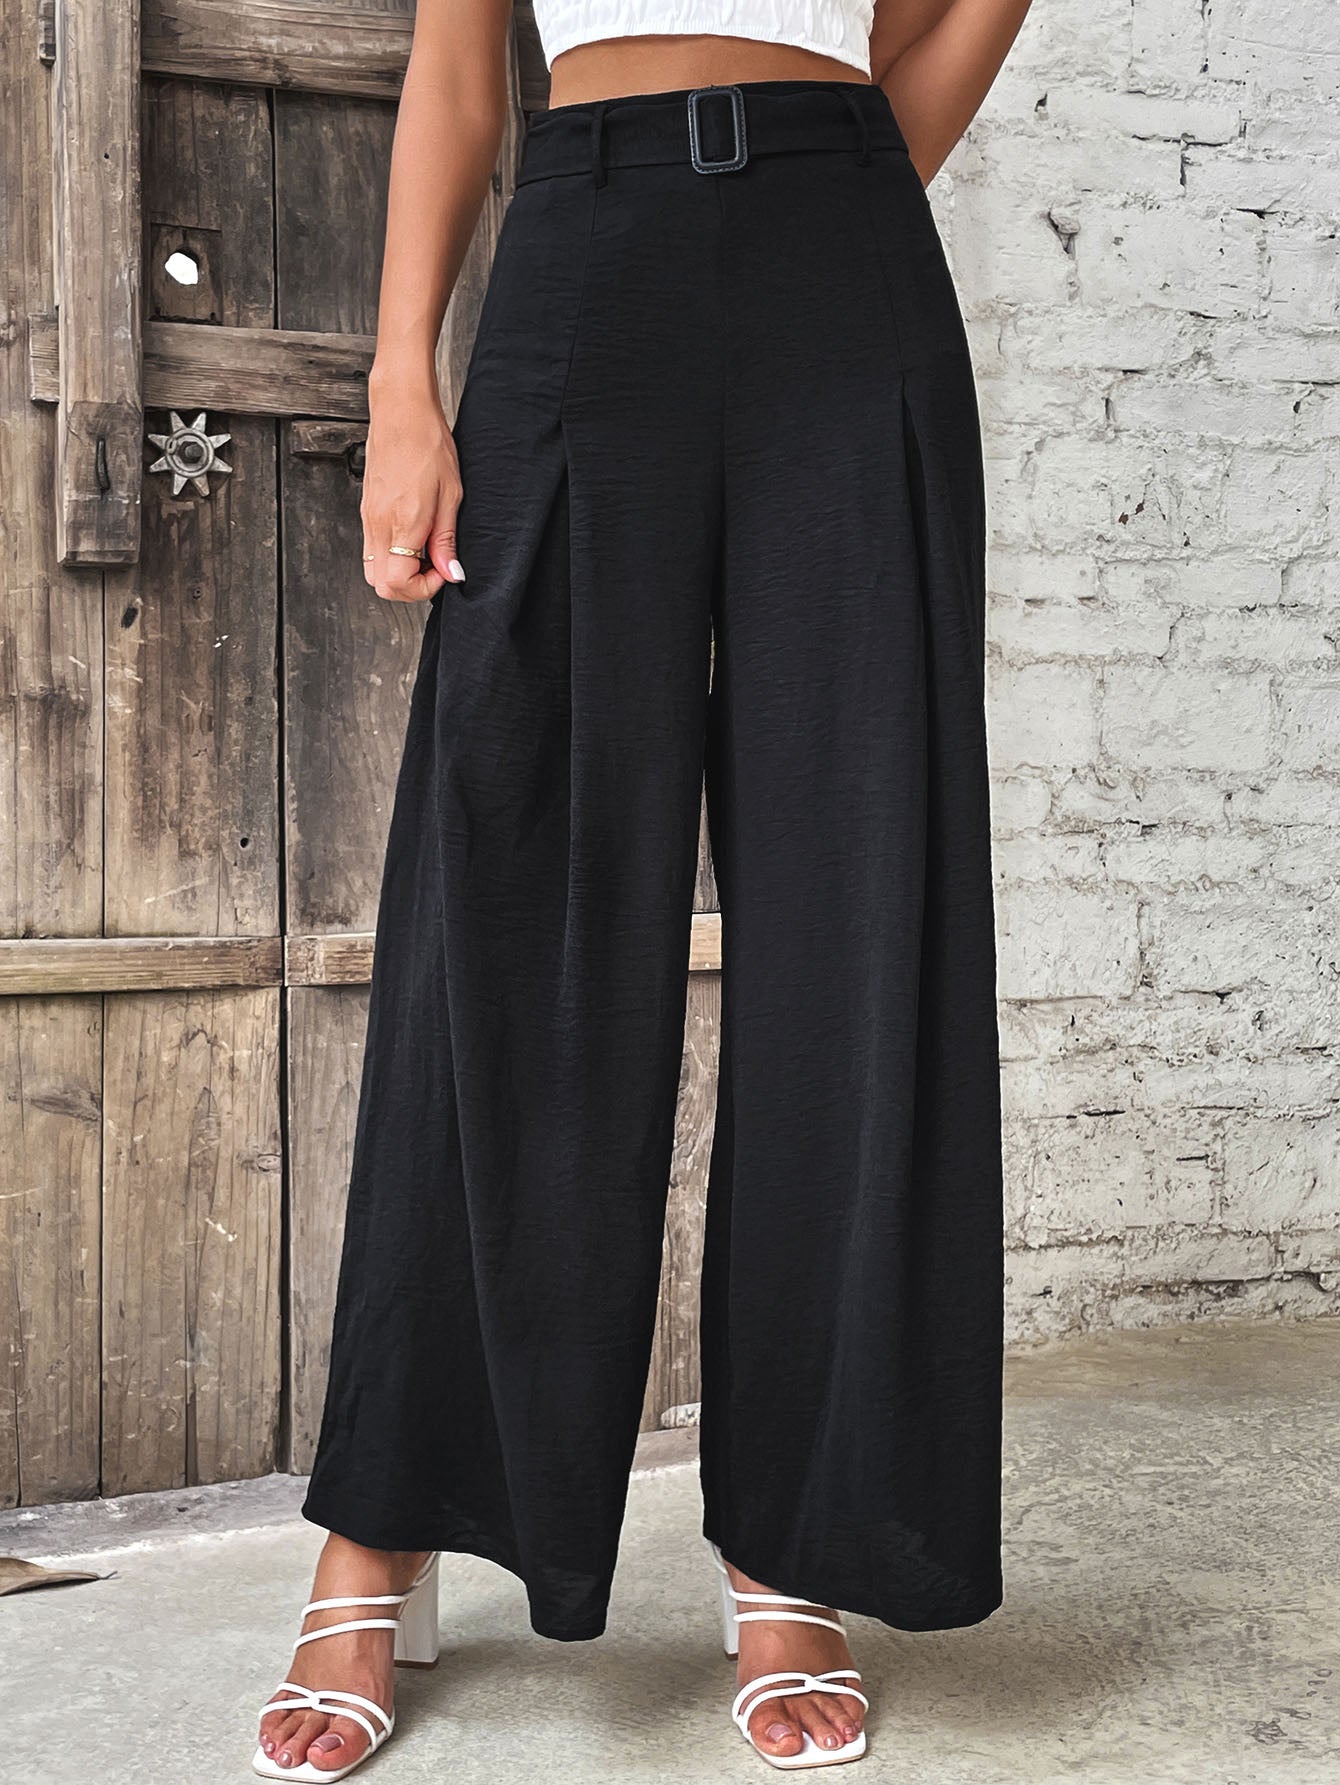 Take Me To The City Ruched High Waist Wide Leg Pants